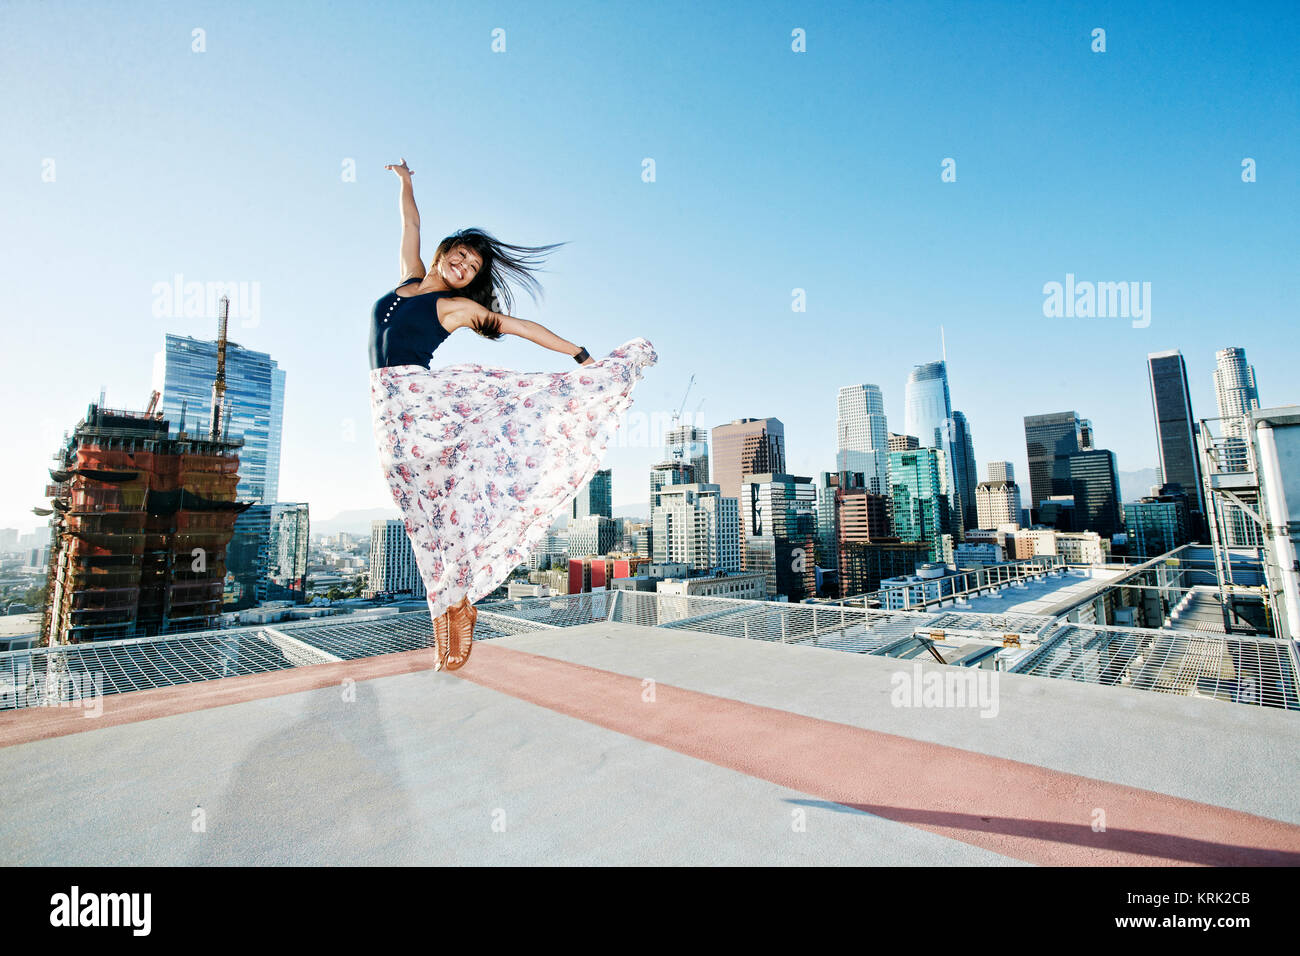 Asian woman jumping on urban rooftop Banque D'Images